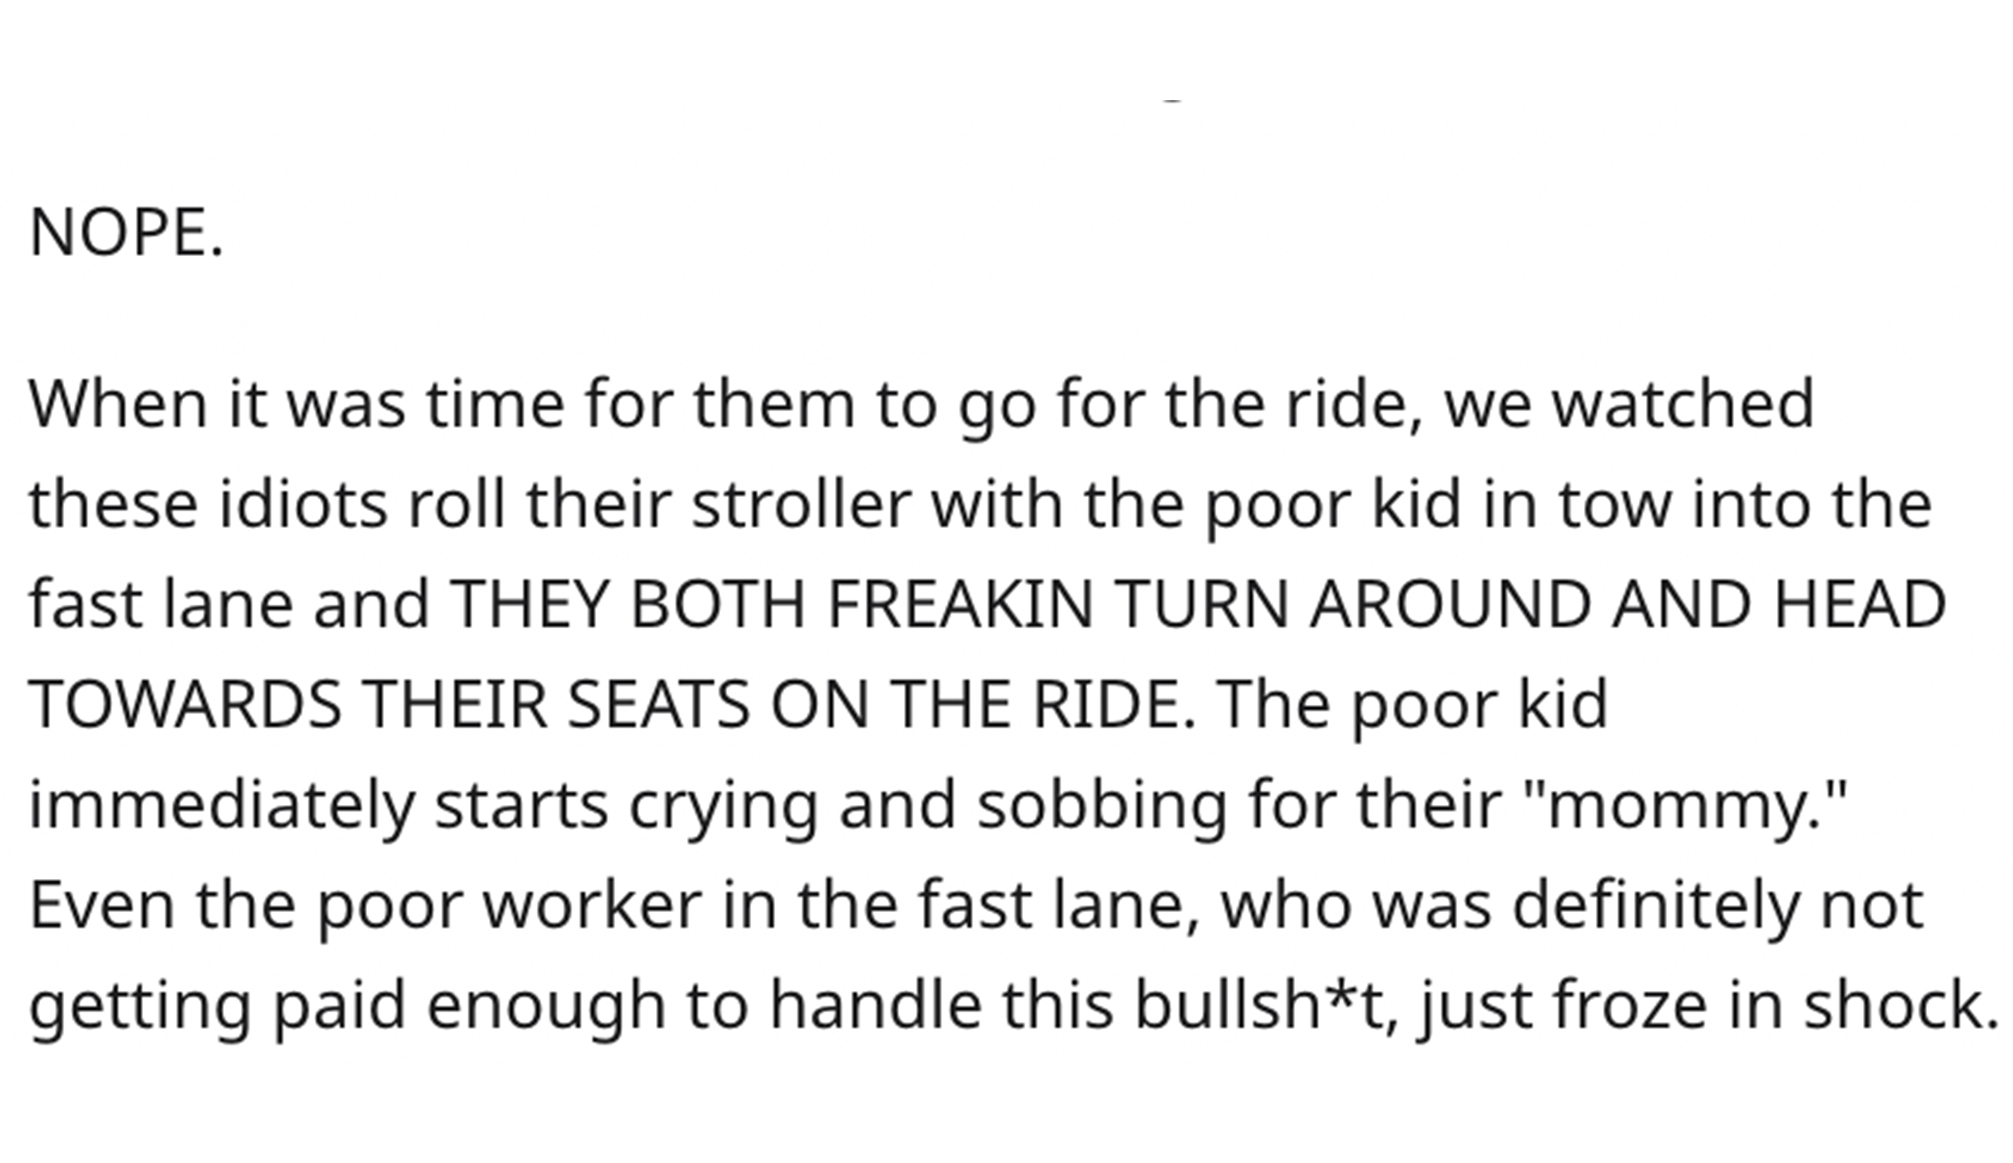 Entitled Parents at Six Flags - Data-flow analysis - Nope. When it was time for them to go for the ride, we watched these idiots roll their stroller with the poor kid in tow into the fast lane and They Both Freakin Turn Around And Head Towards Their Seats